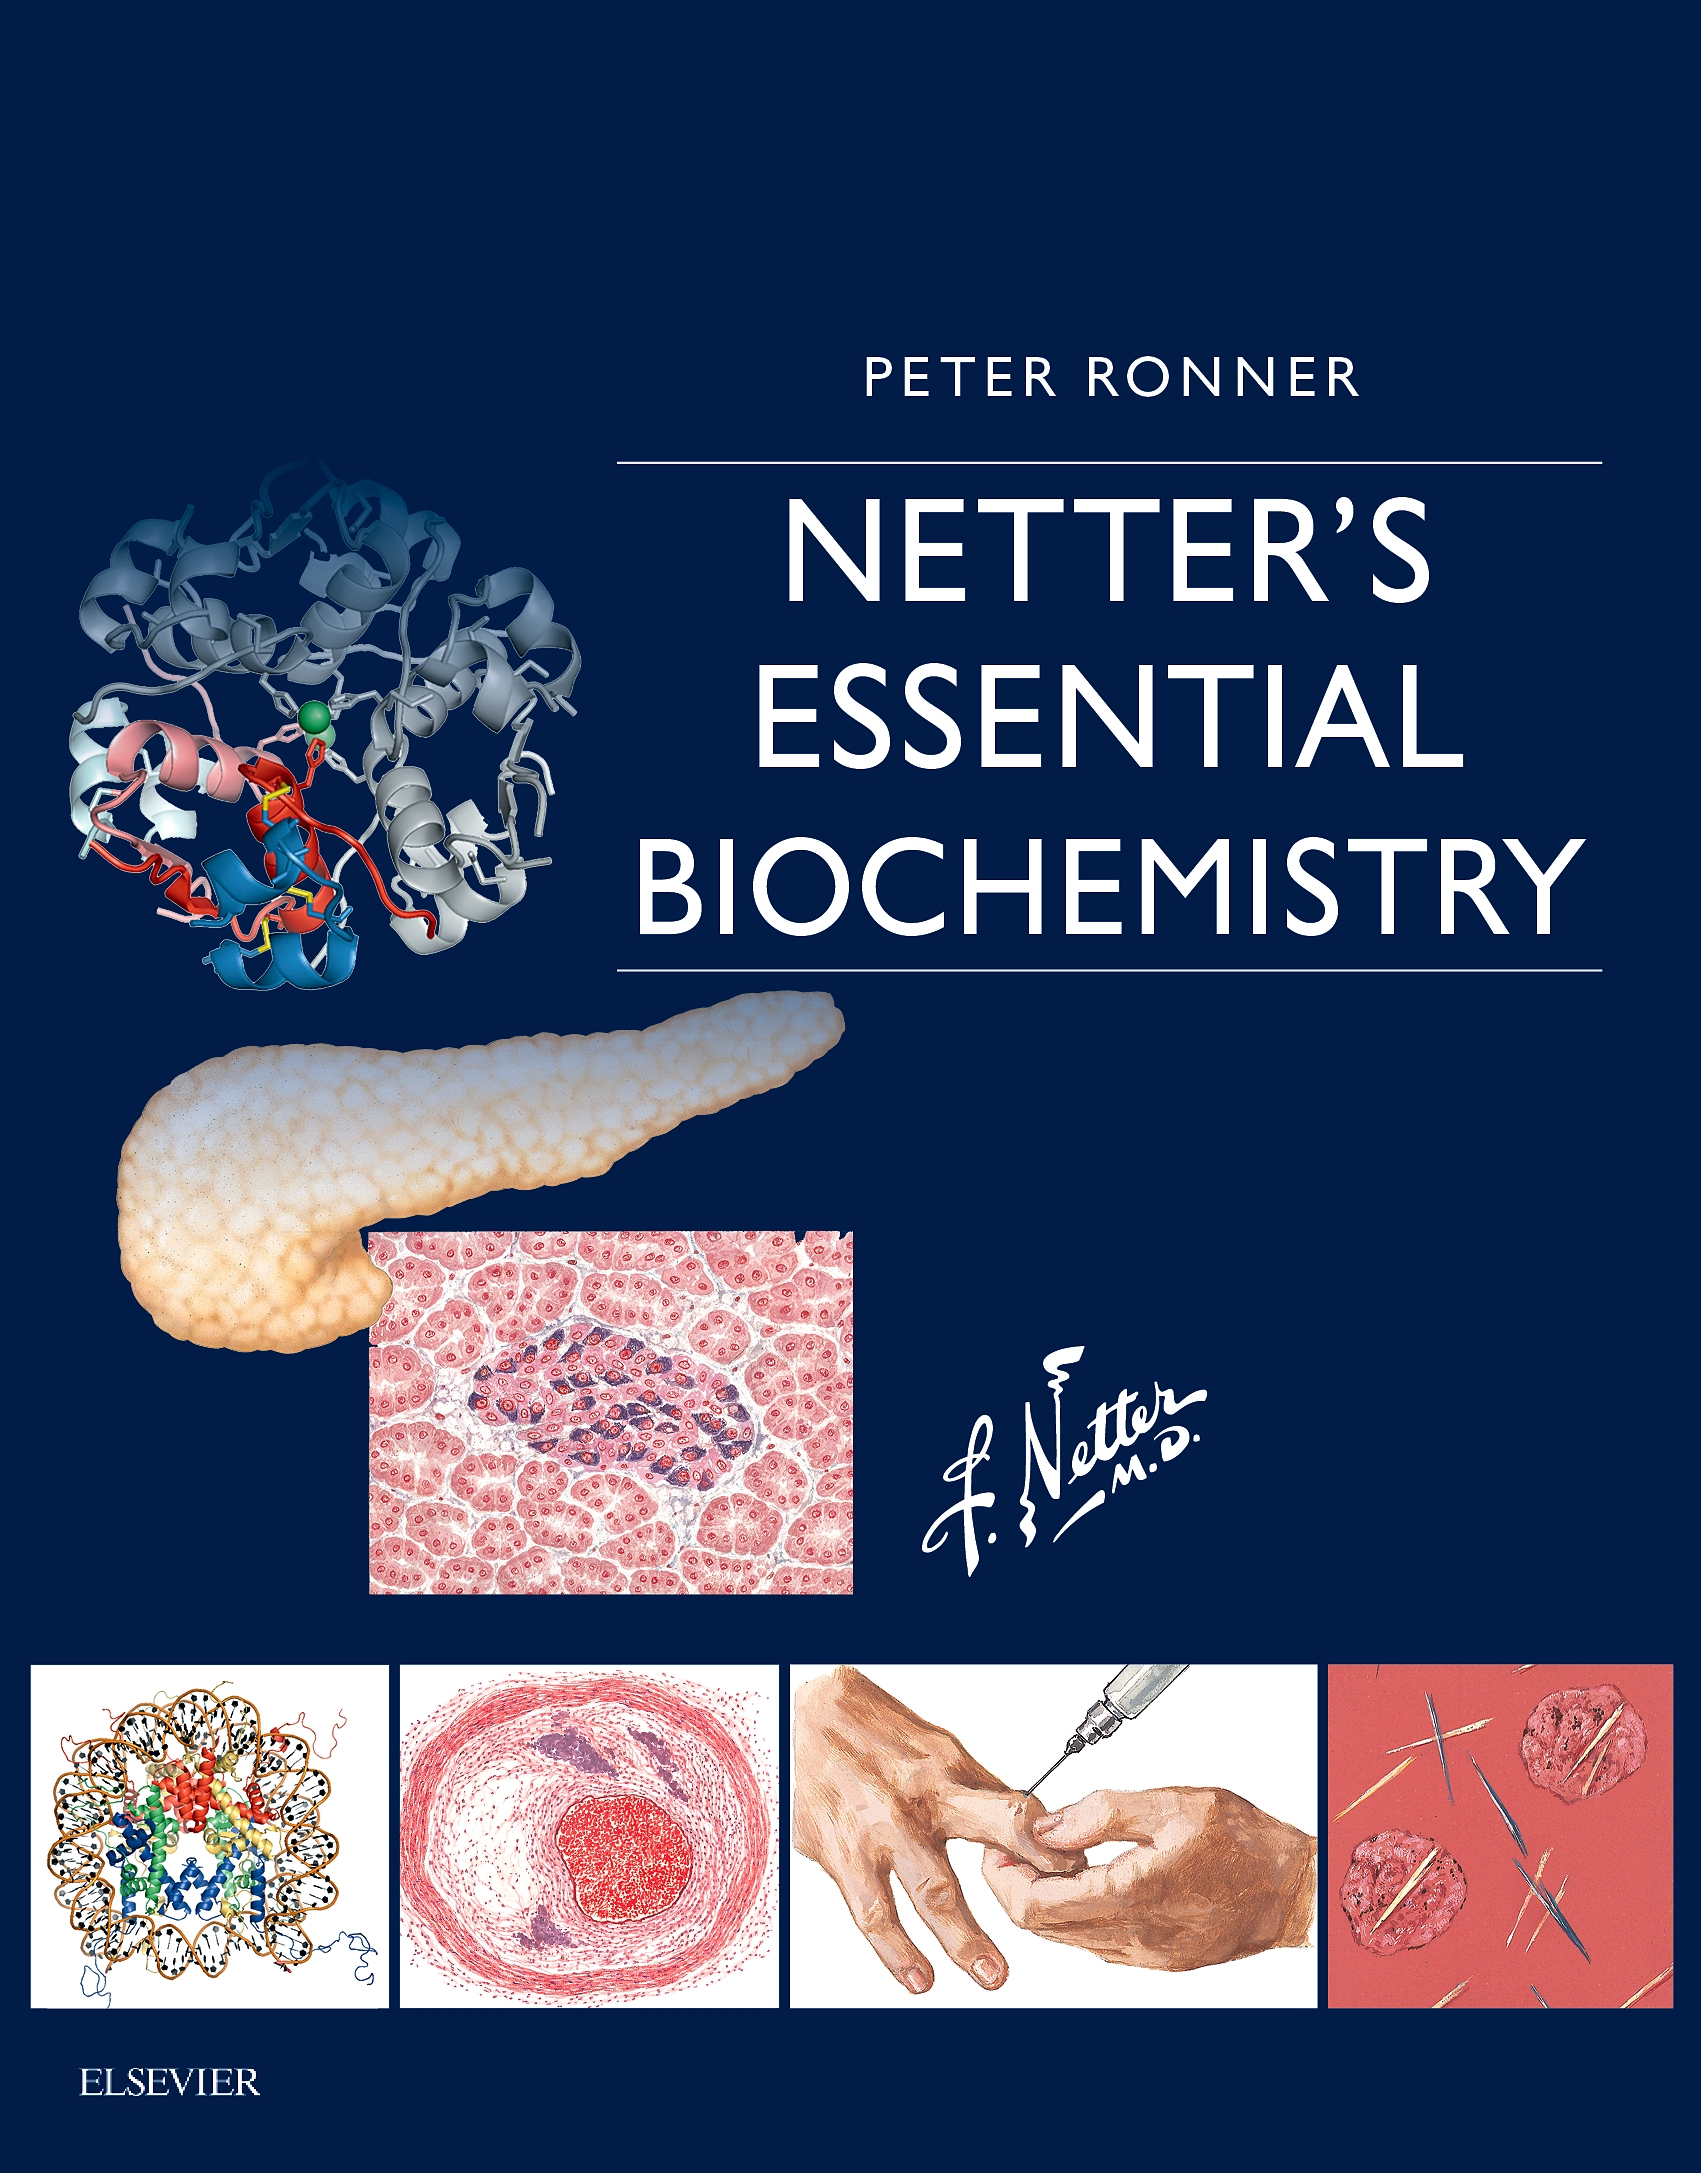 Evolve Resources for Netter's Essential Biochemistry